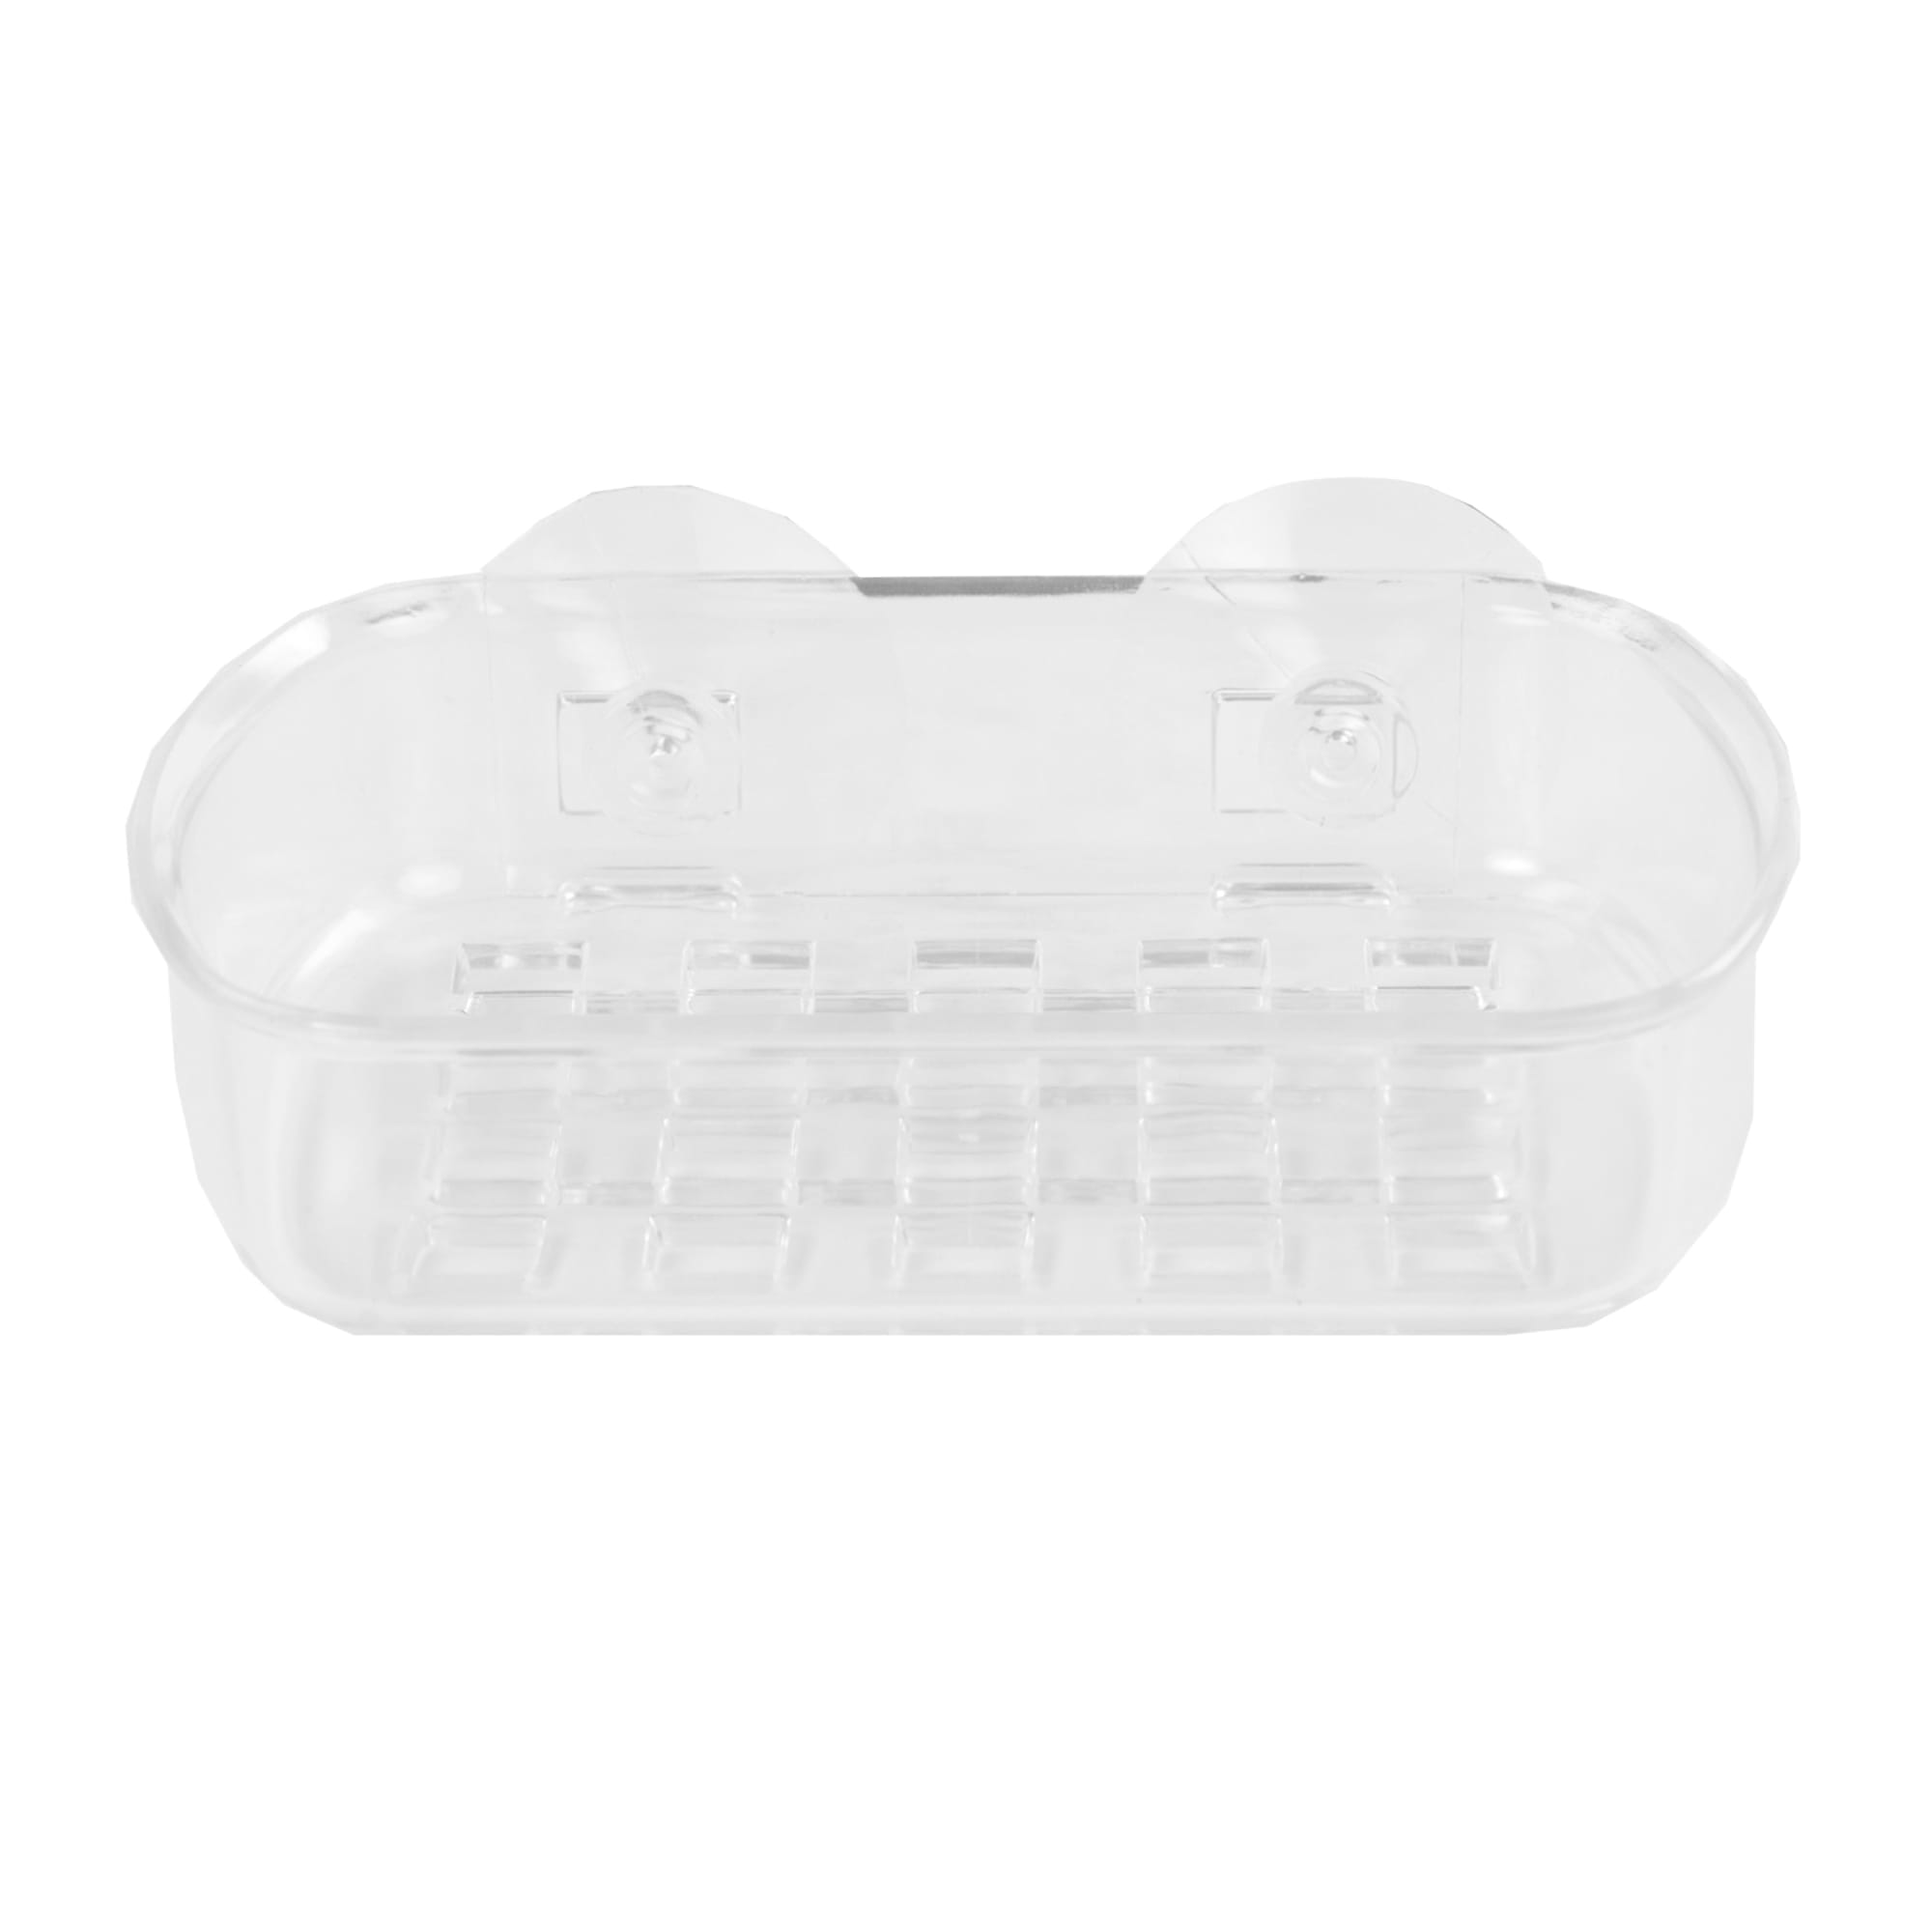 Home Basics Soap Dish with Suction Cups $1.50 EACH, CASE PACK OF 24